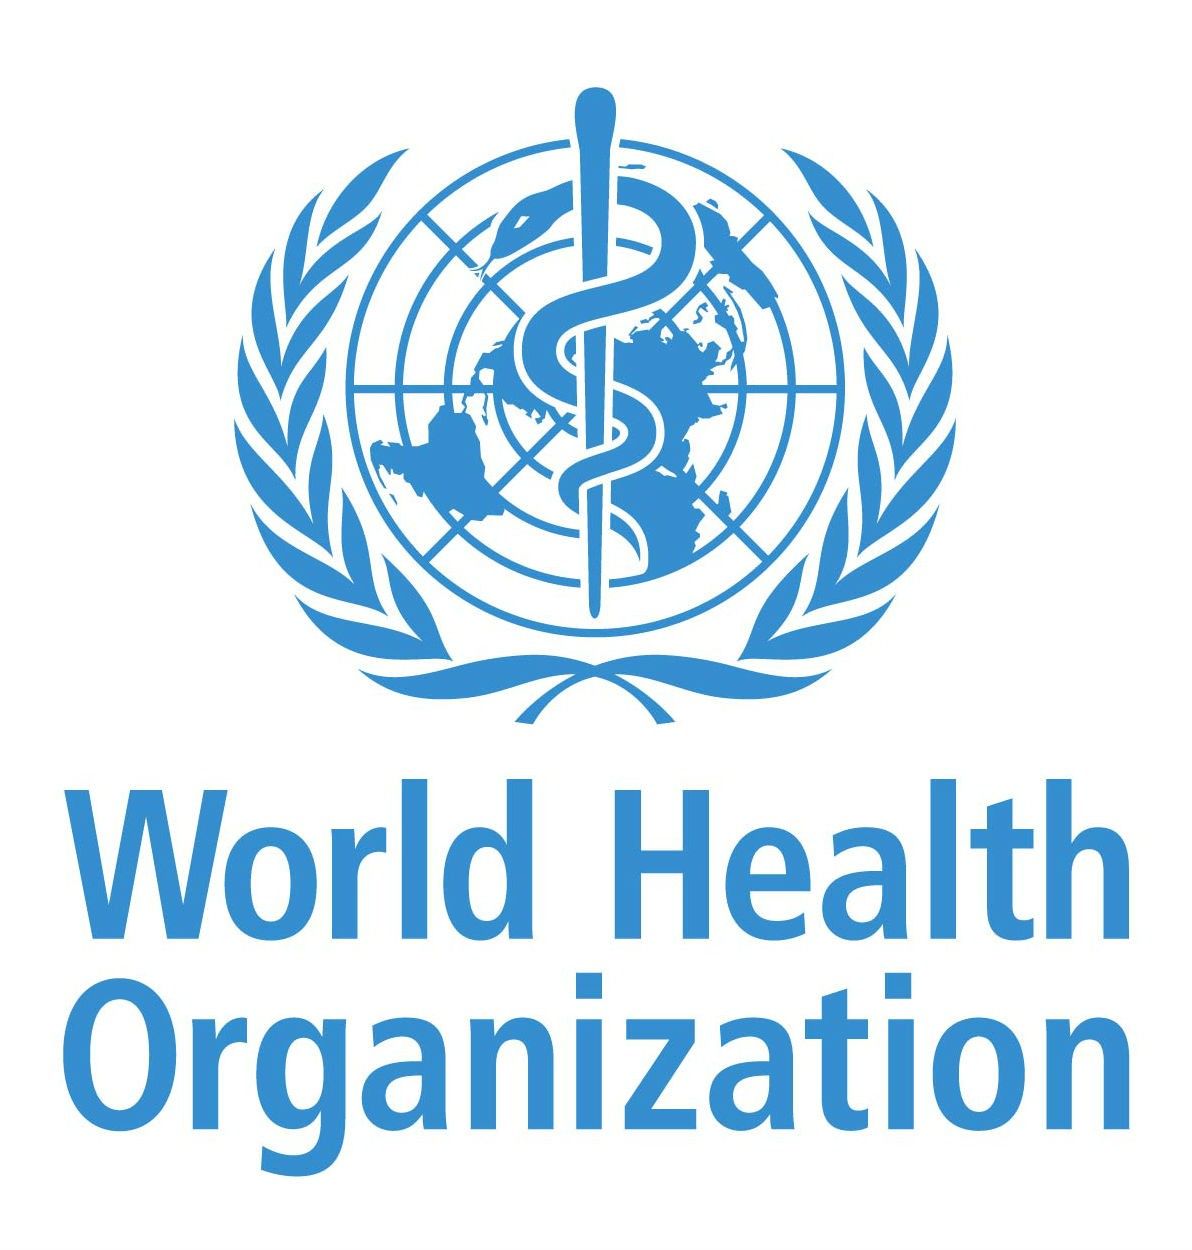 World Health Organization Definition of Physical Activity